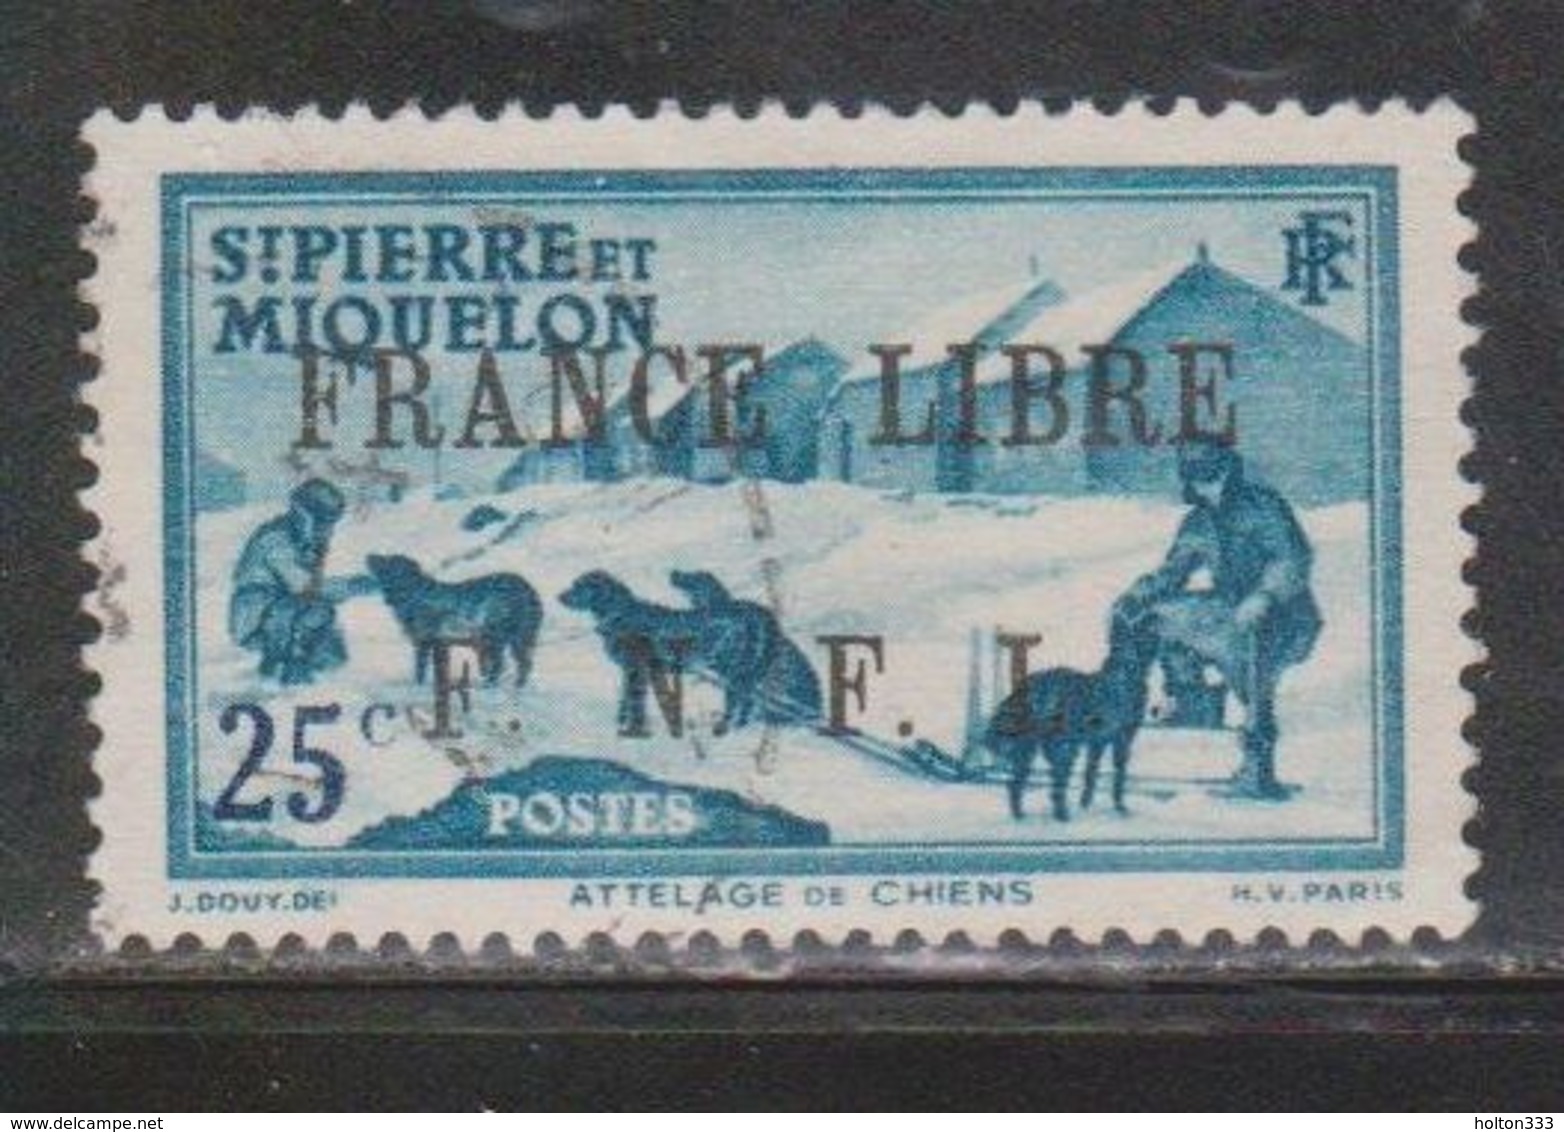 ST PIERRE & MIQUELON Scott # 229 Used 2 - Dog Team With France Libre FNFL Overprint - Used Stamps